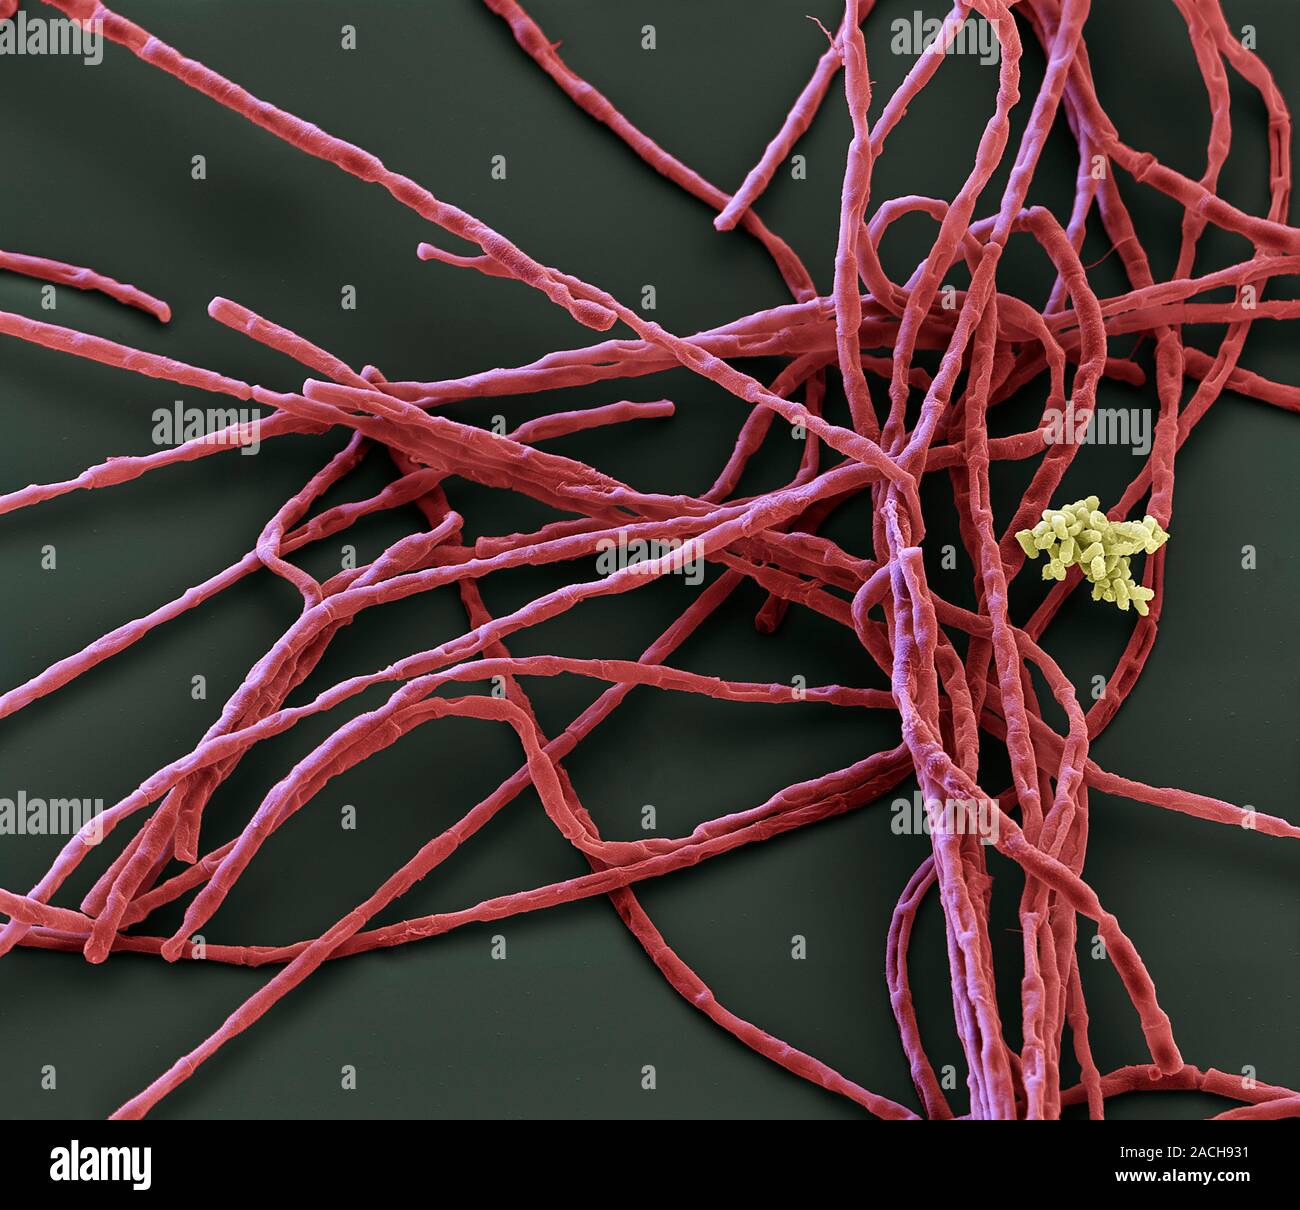 Anthrax Bacteria Coloured Scanning Electron Micrograph Sem Of Bacillus Anthracis Bacteria 4074